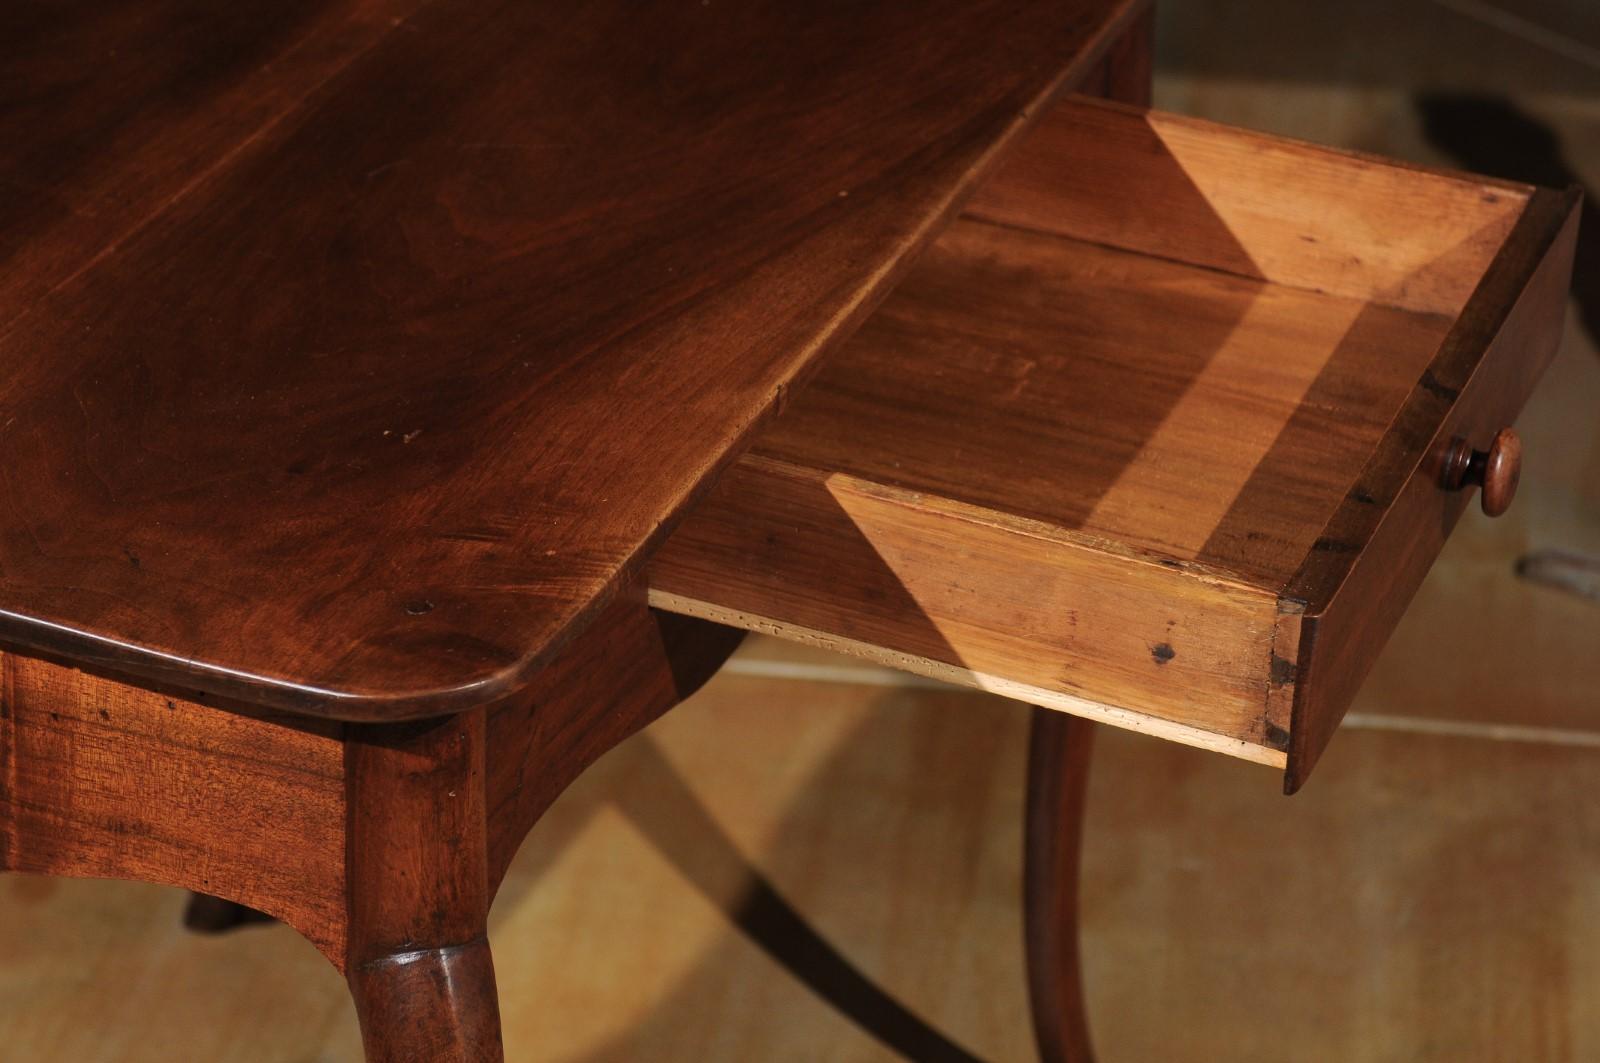 French 1750s Louis XV Walnut Table with Acacia Legs from the Rhône Valley (18. Jahrhundert)